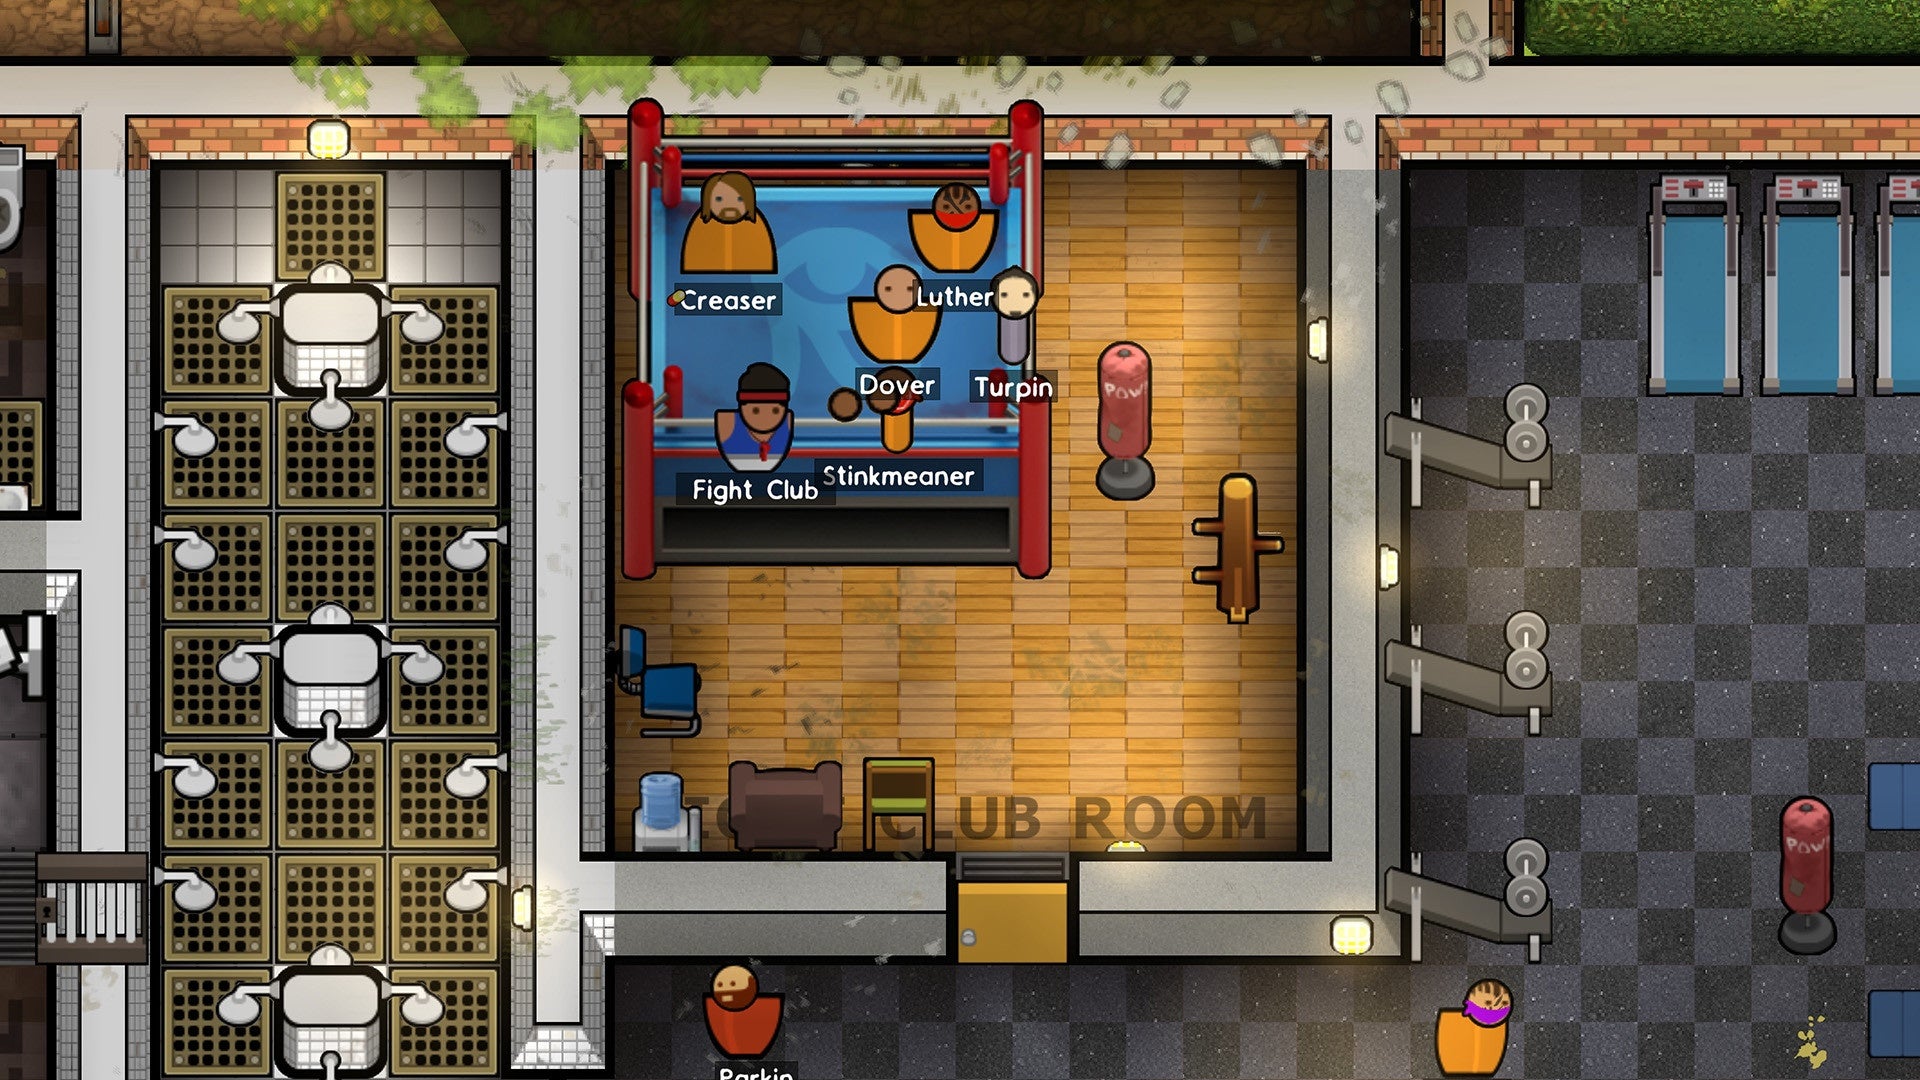 <div>Battle expanded gangs and crooked guards in Prison Architect's Gangs DLC</div>